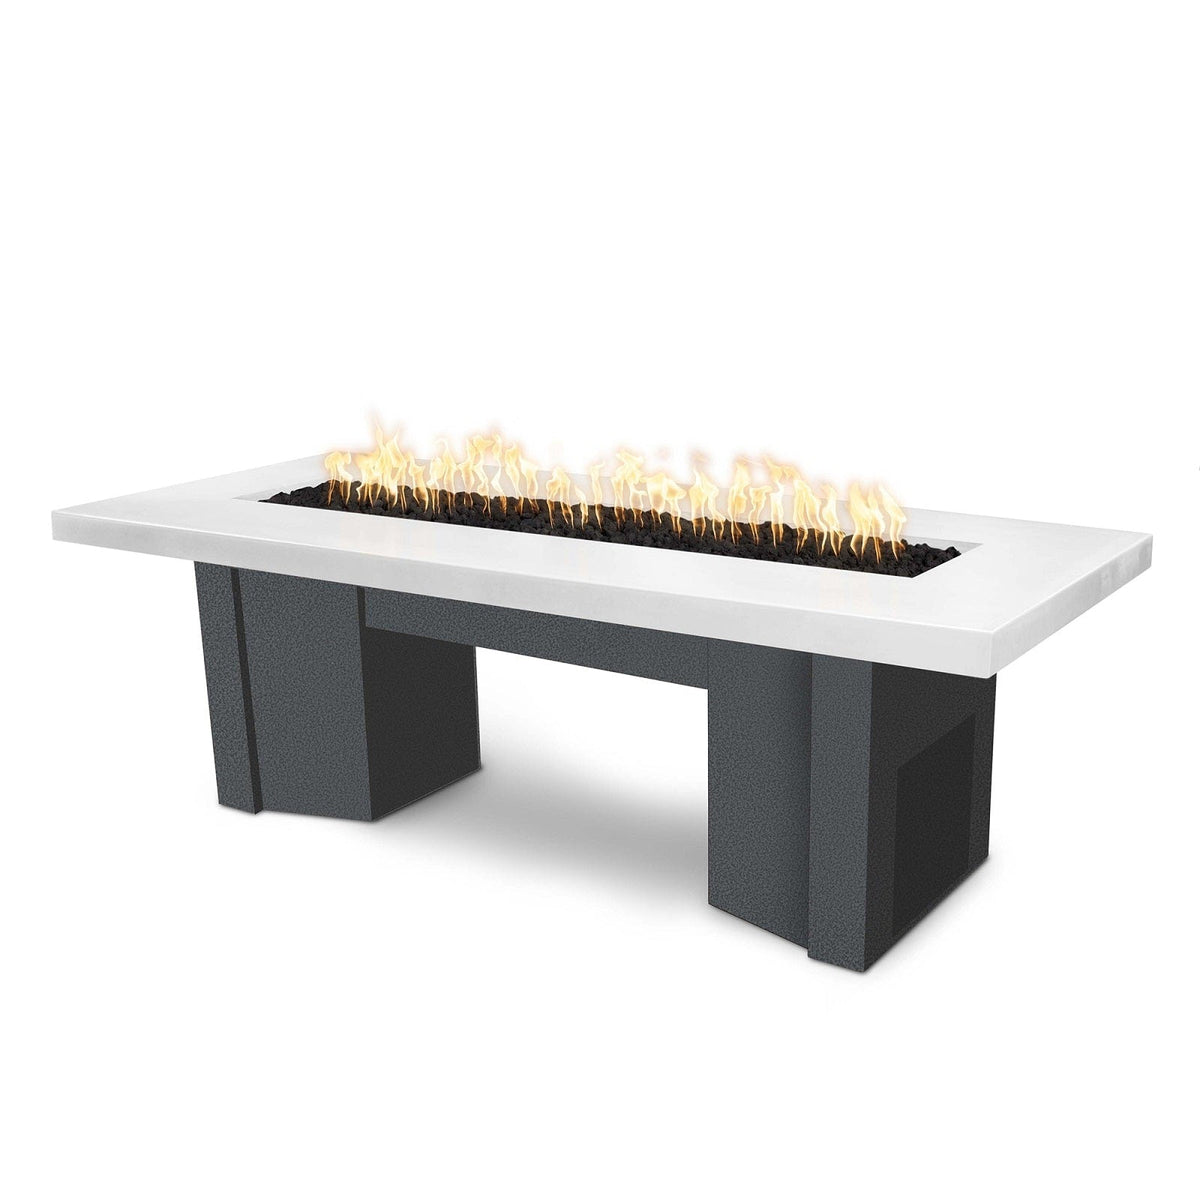 The Outdoor Plus Fire Features Limestone (-LIM) / Silver Vein Powder Coated Steel (-SLV) The Outdoor Plus 60&quot; Alameda Fire Table Smooth Concrete in Natural Gas - Match Lit with Flame Sense System / OPT-ALMGFRC60FSML-NG